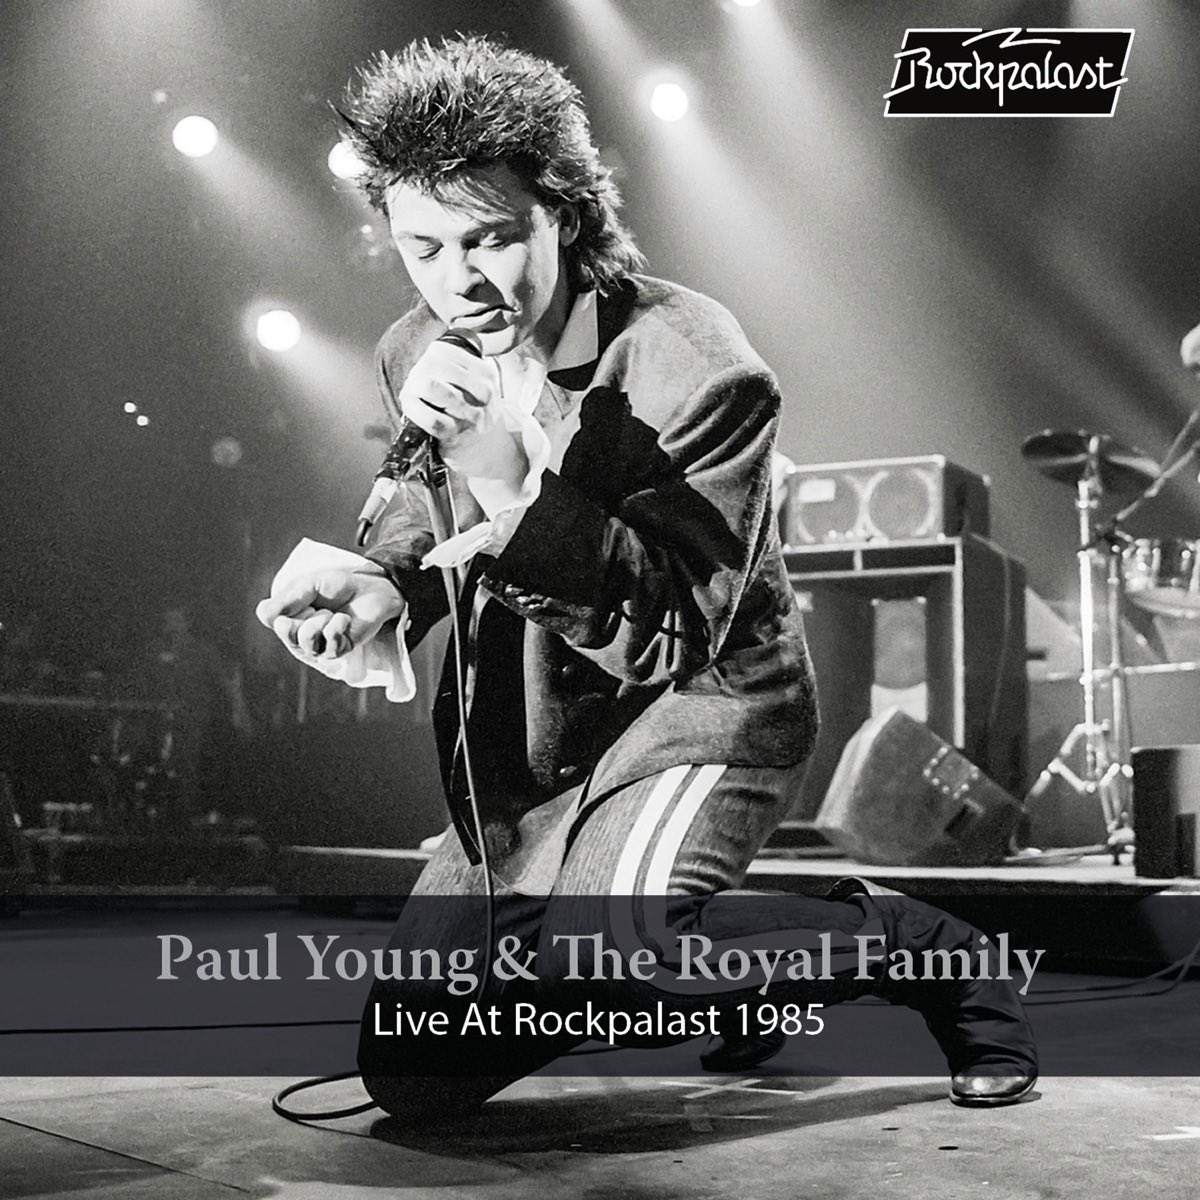 #mondaymusic #trackofmylife Everytime You Go Away (Live, Essen, 1985) by Paul Young